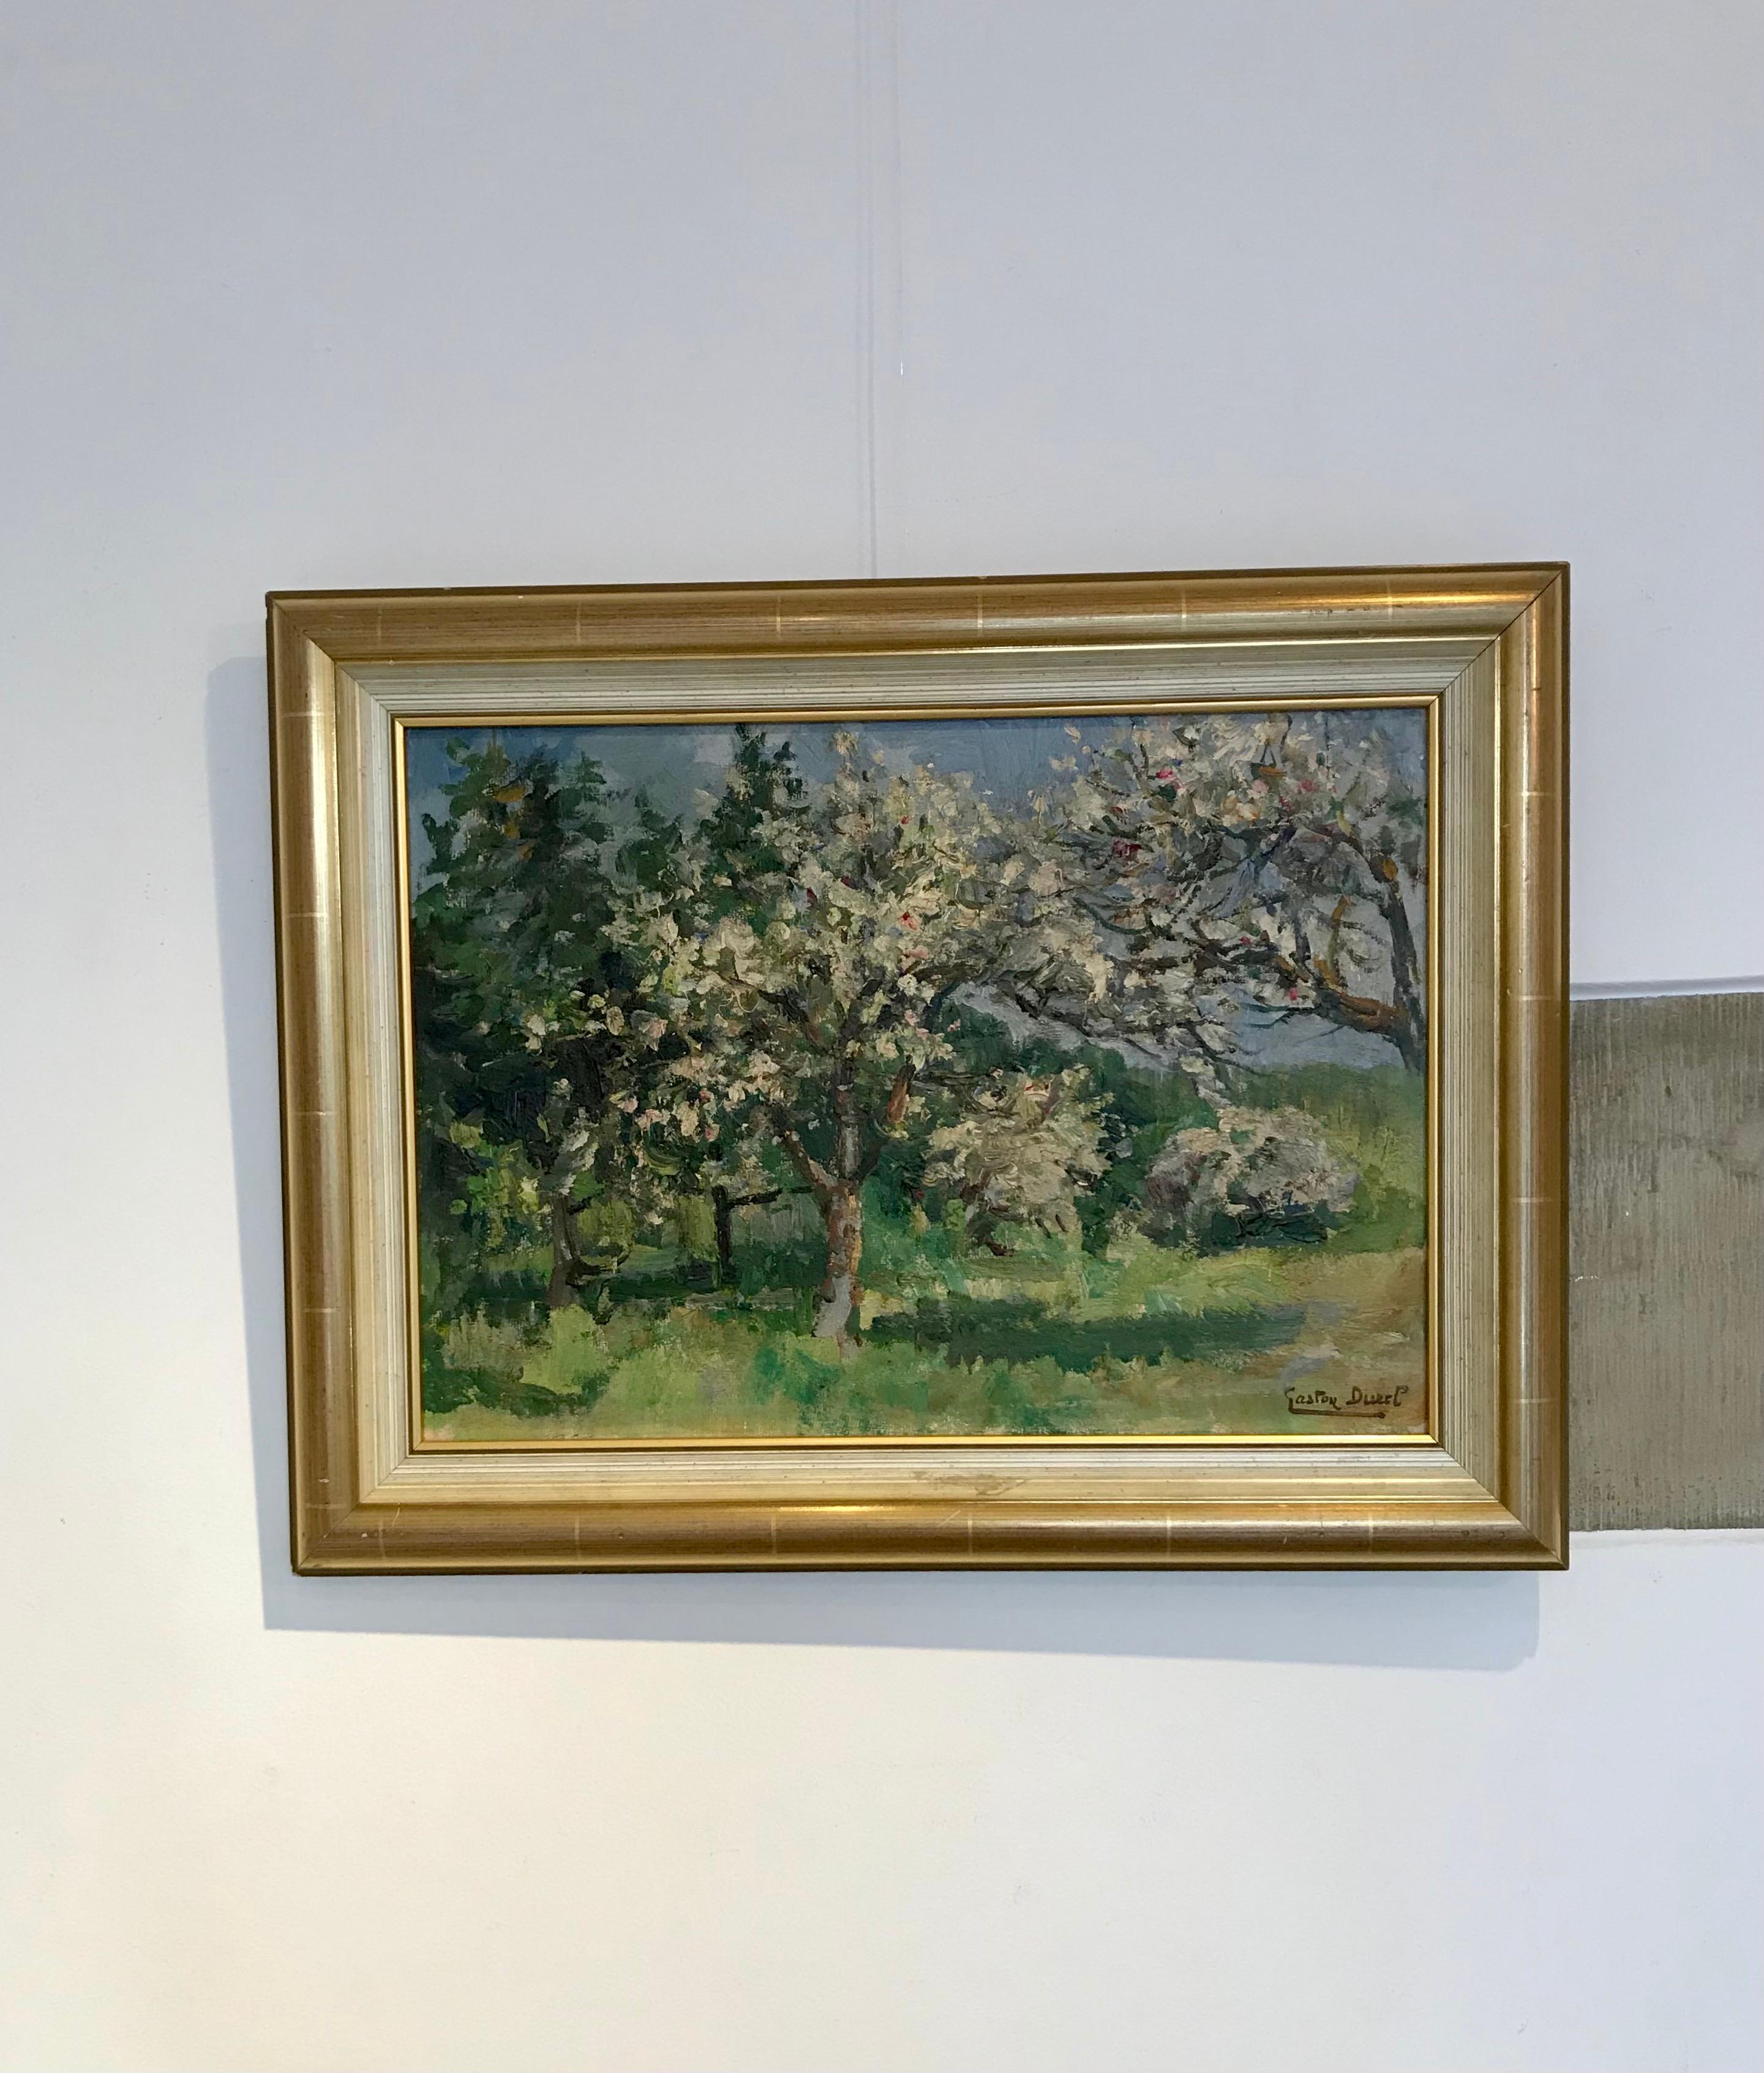 flowering orchard - Painting by Gaston Durel